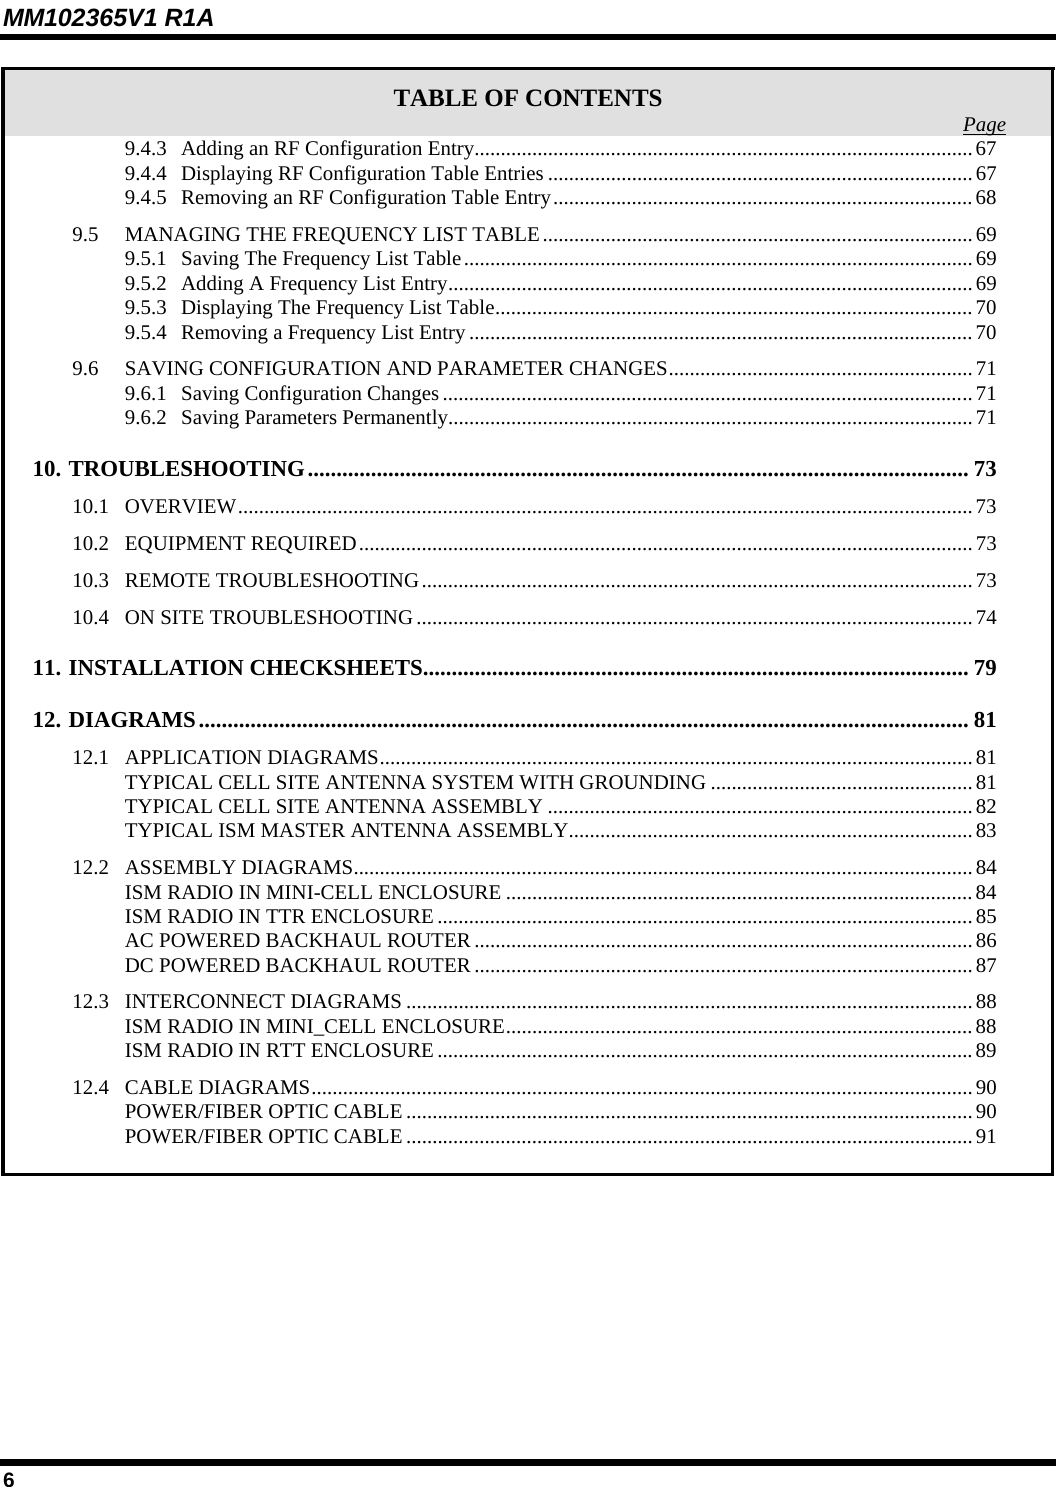 MM102365V1 R1A TABLE OF CONTENTS  Page9.4.3 Adding an RF Configuration Entry...............................................................................................67 9.4.4 Displaying RF Configuration Table Entries .................................................................................67 9.4.5 Removing an RF Configuration Table Entry................................................................................68 9.5 MANAGING THE FREQUENCY LIST TABLE..................................................................................69 9.5.1 Saving The Frequency List Table.................................................................................................69 9.5.2 Adding A Frequency List Entry....................................................................................................69 9.5.3 Displaying The Frequency List Table........................................................................................... 70 9.5.4 Removing a Frequency List Entry................................................................................................70 9.6 SAVING CONFIGURATION AND PARAMETER CHANGES..........................................................71 9.6.1 Saving Configuration Changes.....................................................................................................71 9.6.2 Saving Parameters Permanently....................................................................................................71 10. TROUBLESHOOTING................................................................................................................... 73 10.1 OVERVIEW............................................................................................................................................73 10.2 EQUIPMENT REQUIRED.....................................................................................................................73 10.3 REMOTE TROUBLESHOOTING......................................................................................................... 73 10.4 ON SITE TROUBLESHOOTING..........................................................................................................74 11. INSTALLATION CHECKSHEETS............................................................................................... 79 12. DIAGRAMS...................................................................................................................................... 81 12.1 APPLICATION DIAGRAMS.................................................................................................................81 TYPICAL CELL SITE ANTENNA SYSTEM WITH GROUNDING ..................................................81 TYPICAL CELL SITE ANTENNA ASSEMBLY .................................................................................82 TYPICAL ISM MASTER ANTENNA ASSEMBLY.............................................................................83 12.2 ASSEMBLY DIAGRAMS......................................................................................................................84 ISM RADIO IN MINI-CELL ENCLOSURE .........................................................................................84 ISM RADIO IN TTR ENCLOSURE ......................................................................................................85 AC POWERED BACKHAUL ROUTER ...............................................................................................86 DC POWERED BACKHAUL ROUTER ...............................................................................................87 12.3 INTERCONNECT DIAGRAMS ............................................................................................................88 ISM RADIO IN MINI_CELL ENCLOSURE.........................................................................................88 ISM RADIO IN RTT ENCLOSURE ......................................................................................................89 12.4 CABLE DIAGRAMS..............................................................................................................................90 POWER/FIBER OPTIC CABLE ............................................................................................................90 POWER/FIBER OPTIC CABLE ............................................................................................................91  6 